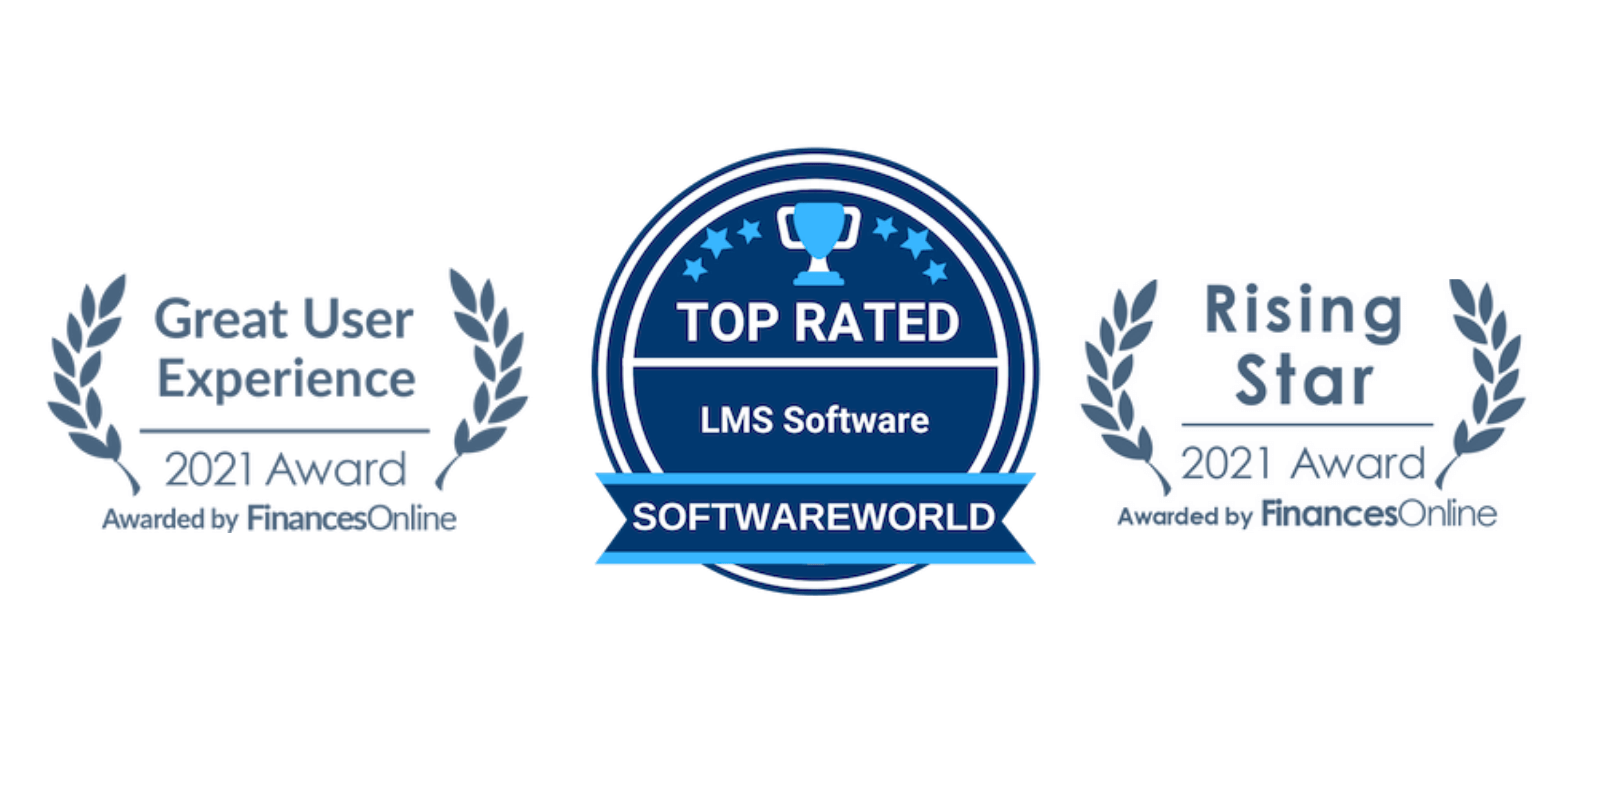 A graphic showing LearnWorlds' SoftwareWorld and FinancesOnline badges.